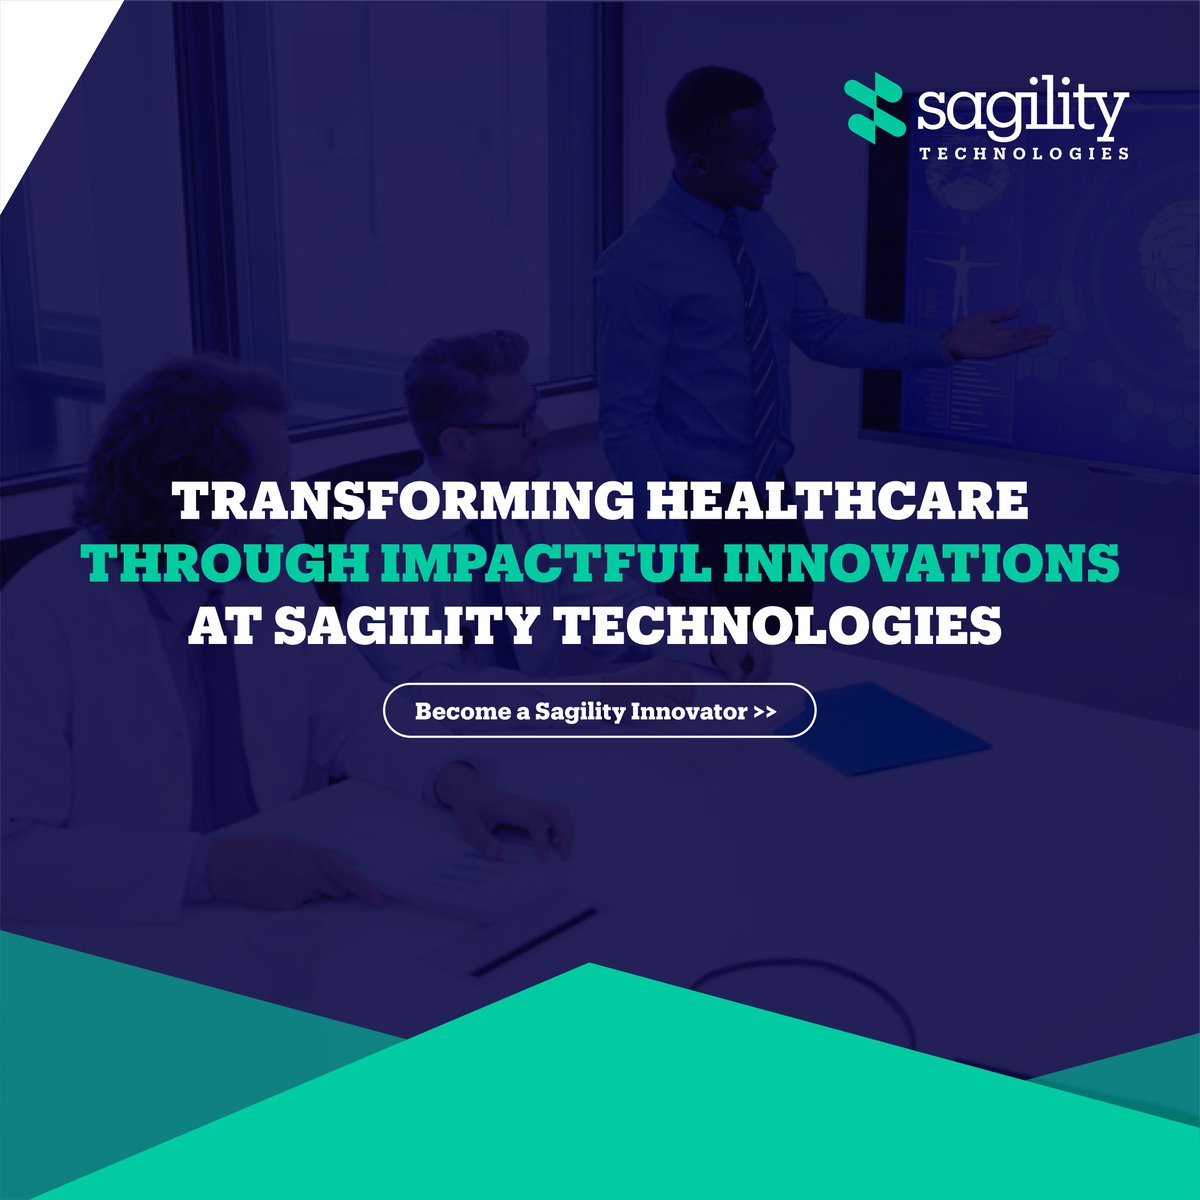 Power your career at Sagility Technologies. Join us in our commitment to optimize collections and streamline EDI data processing through our advanced CMS. Visit bit.ly/46MCn3j for more. #Sagility #SagilityTechnologies #HealthcareInnovation #SagilityTech